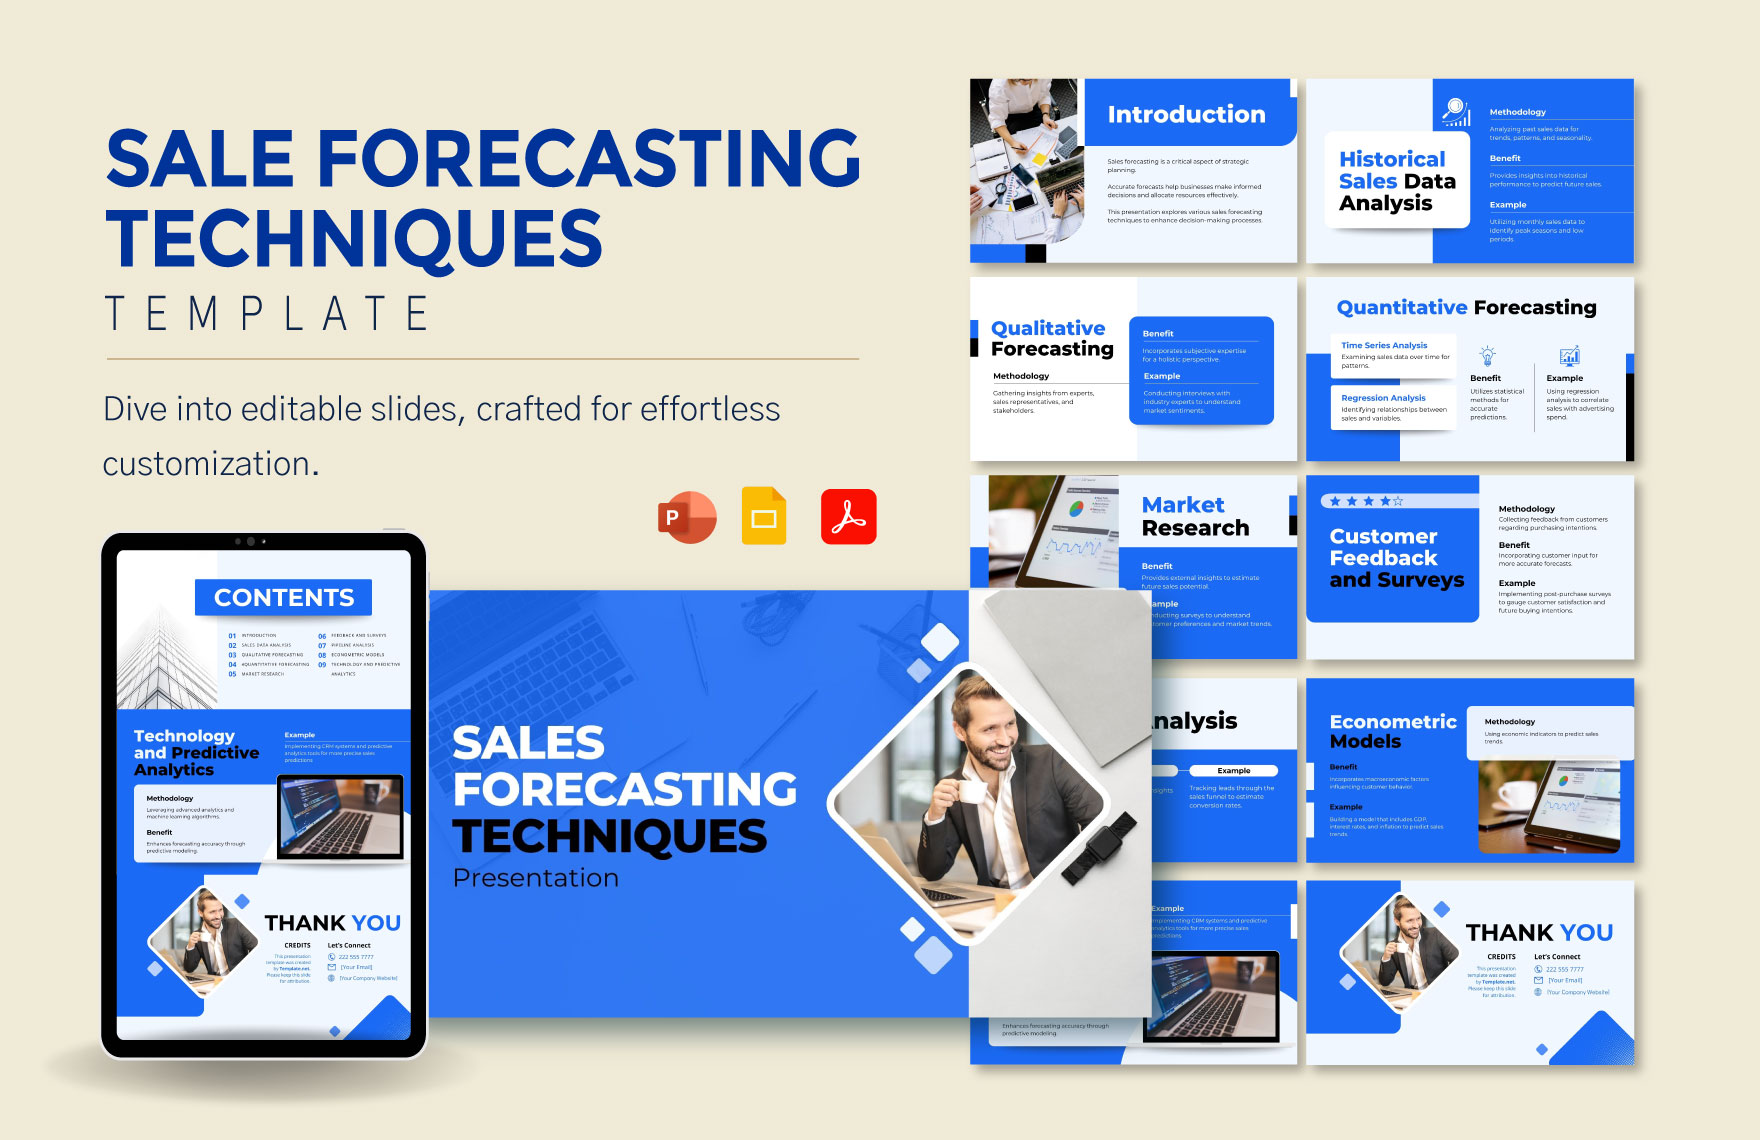 Sales Forecasting Techniques Template in PDF, PowerPoint, Google Slides